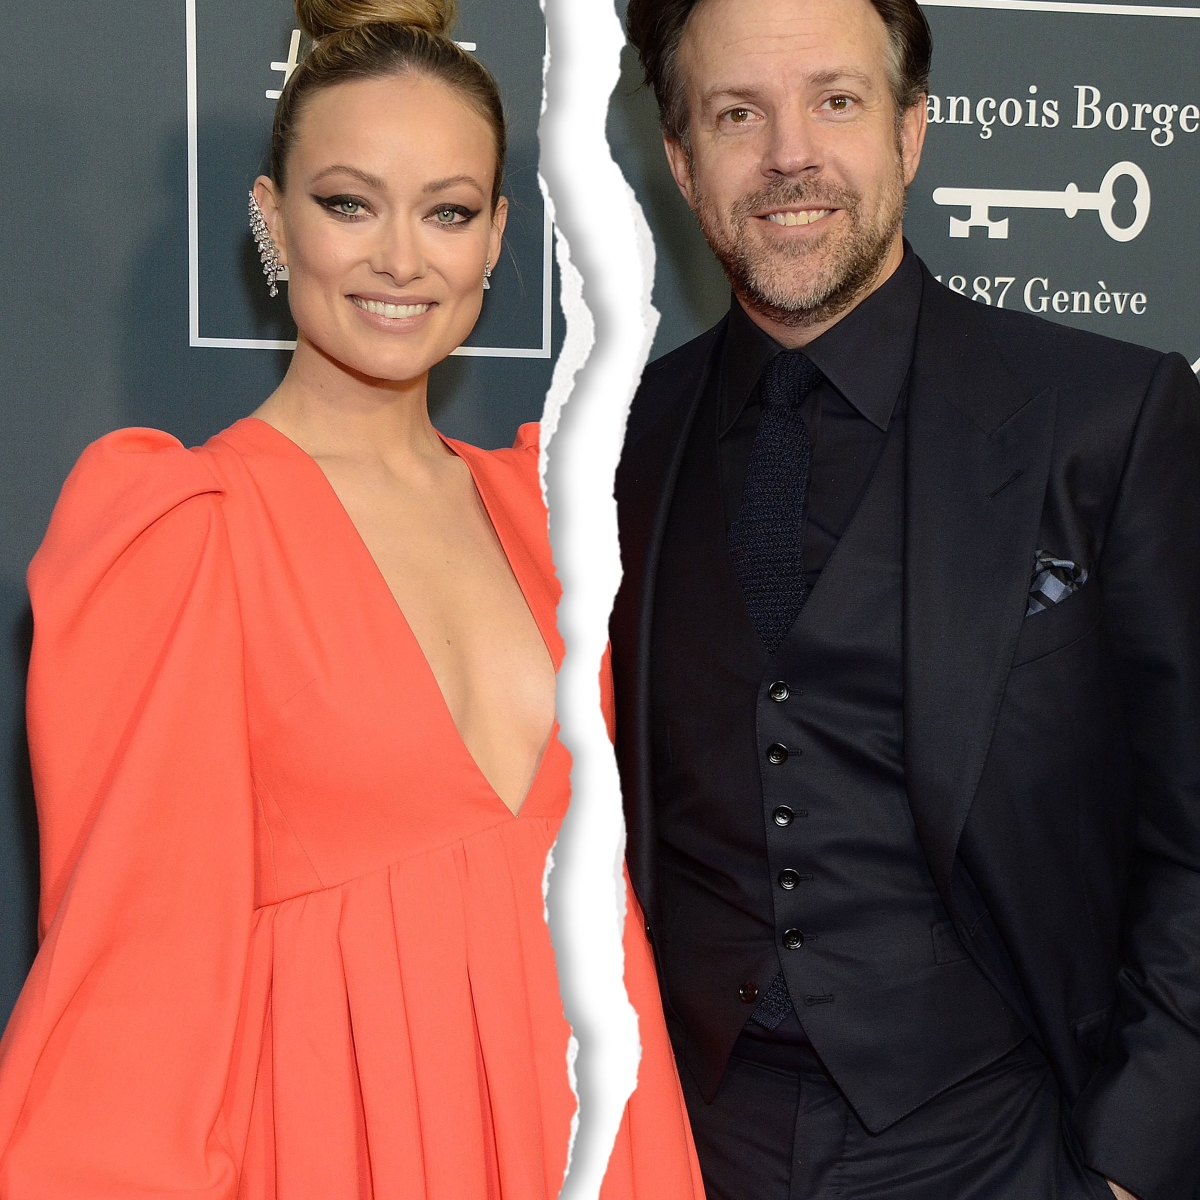 Harry Styles and Olivia Wilde's Relationship Timeline